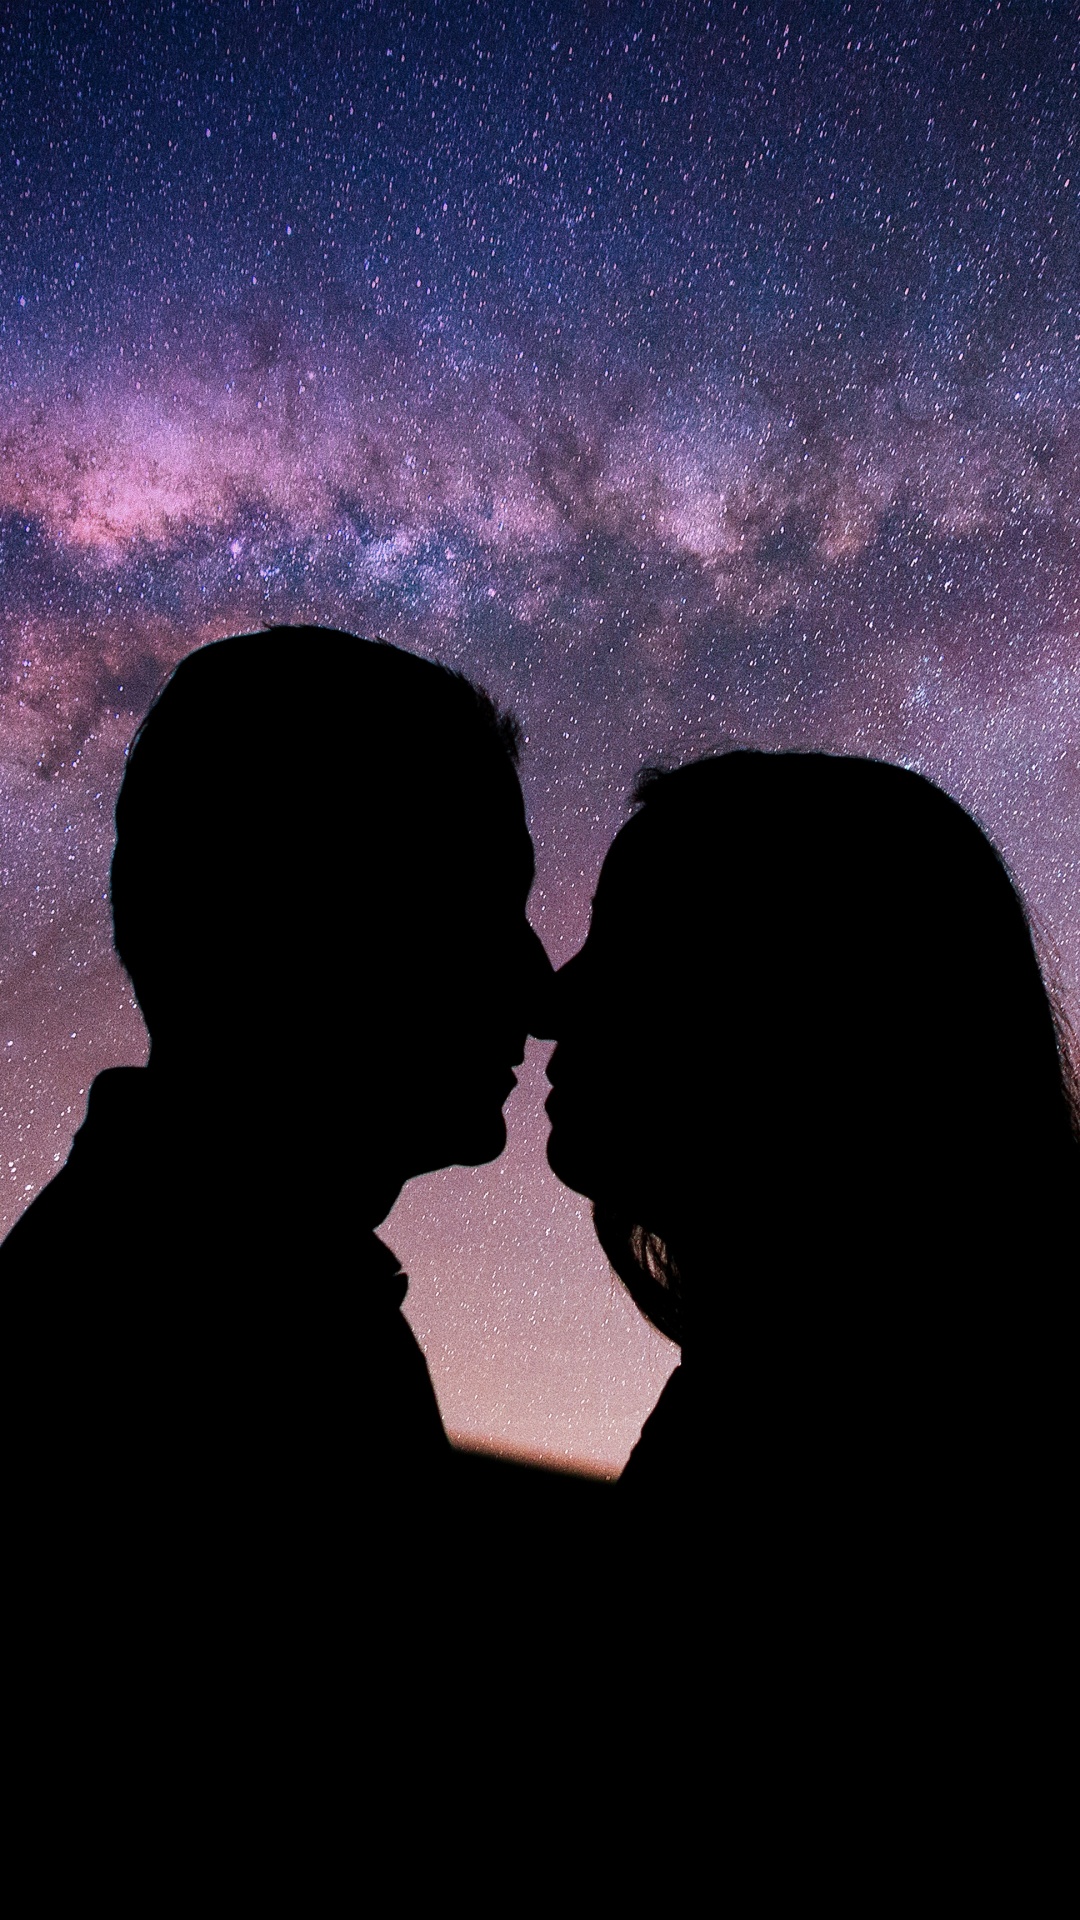 Amour, Nuit, Atmosphère, Interaction, Silhouette. Wallpaper in 1080x1920 Resolution